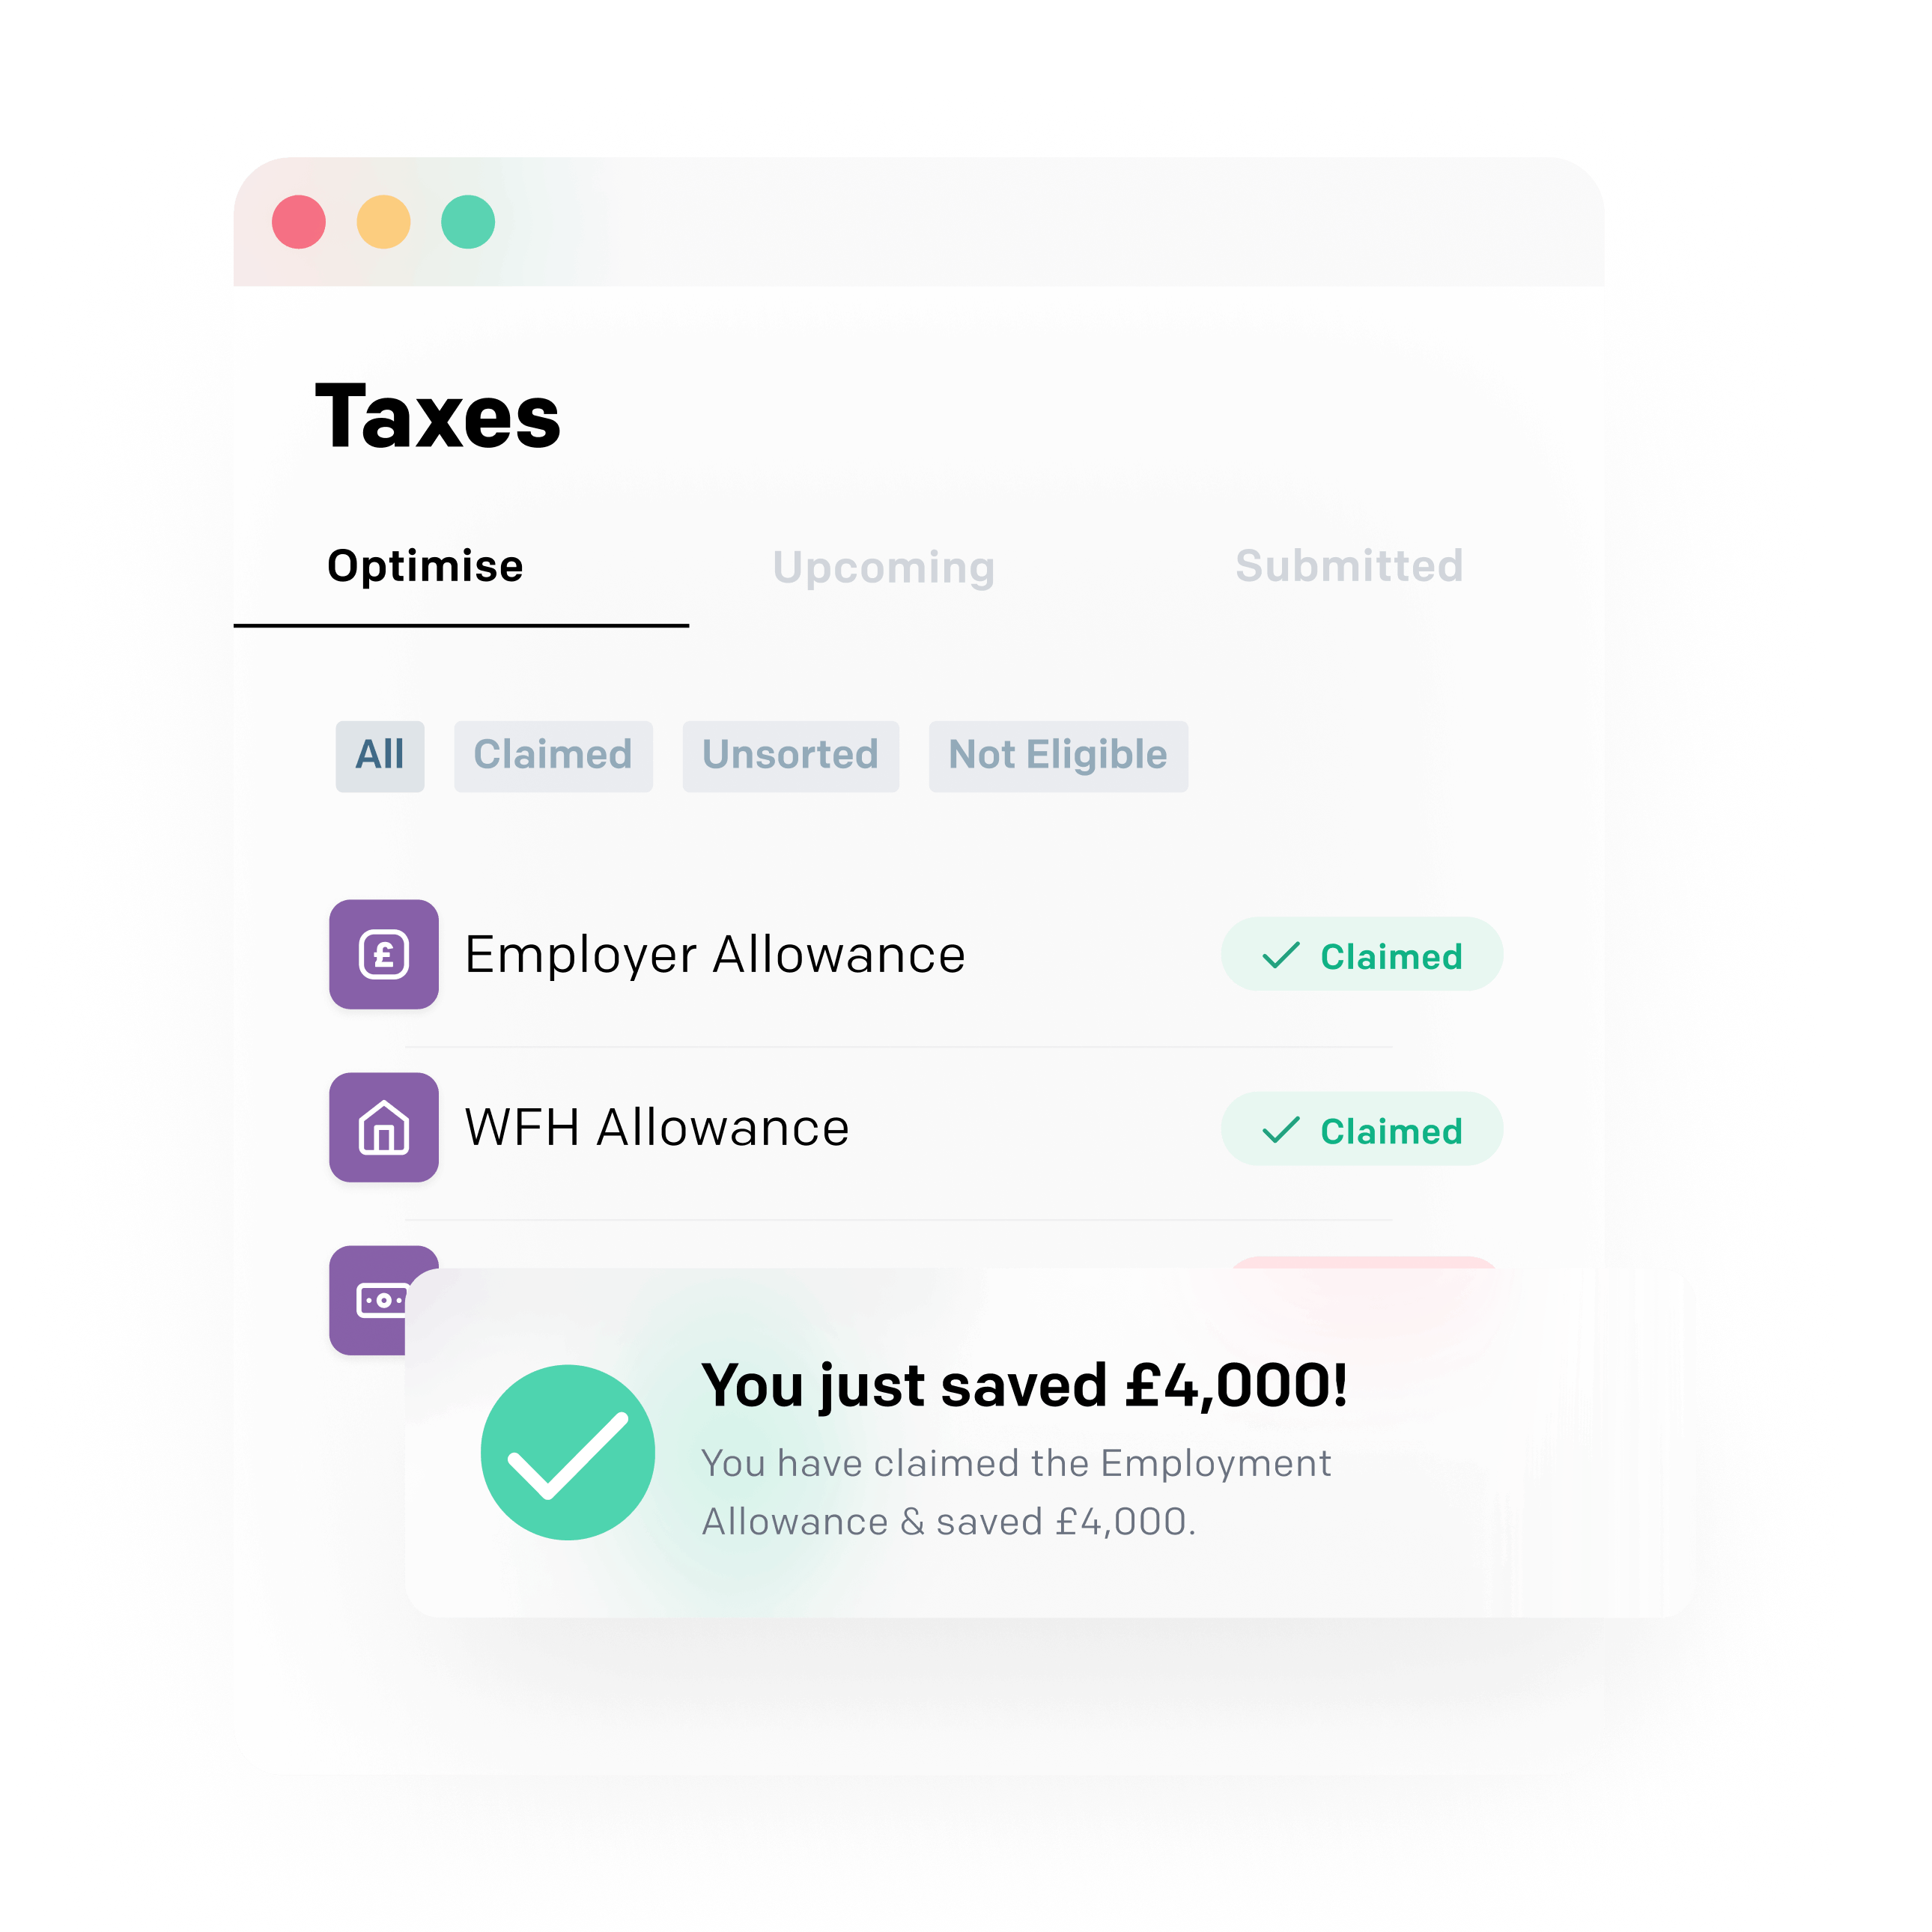 Access real-time tax optimisation